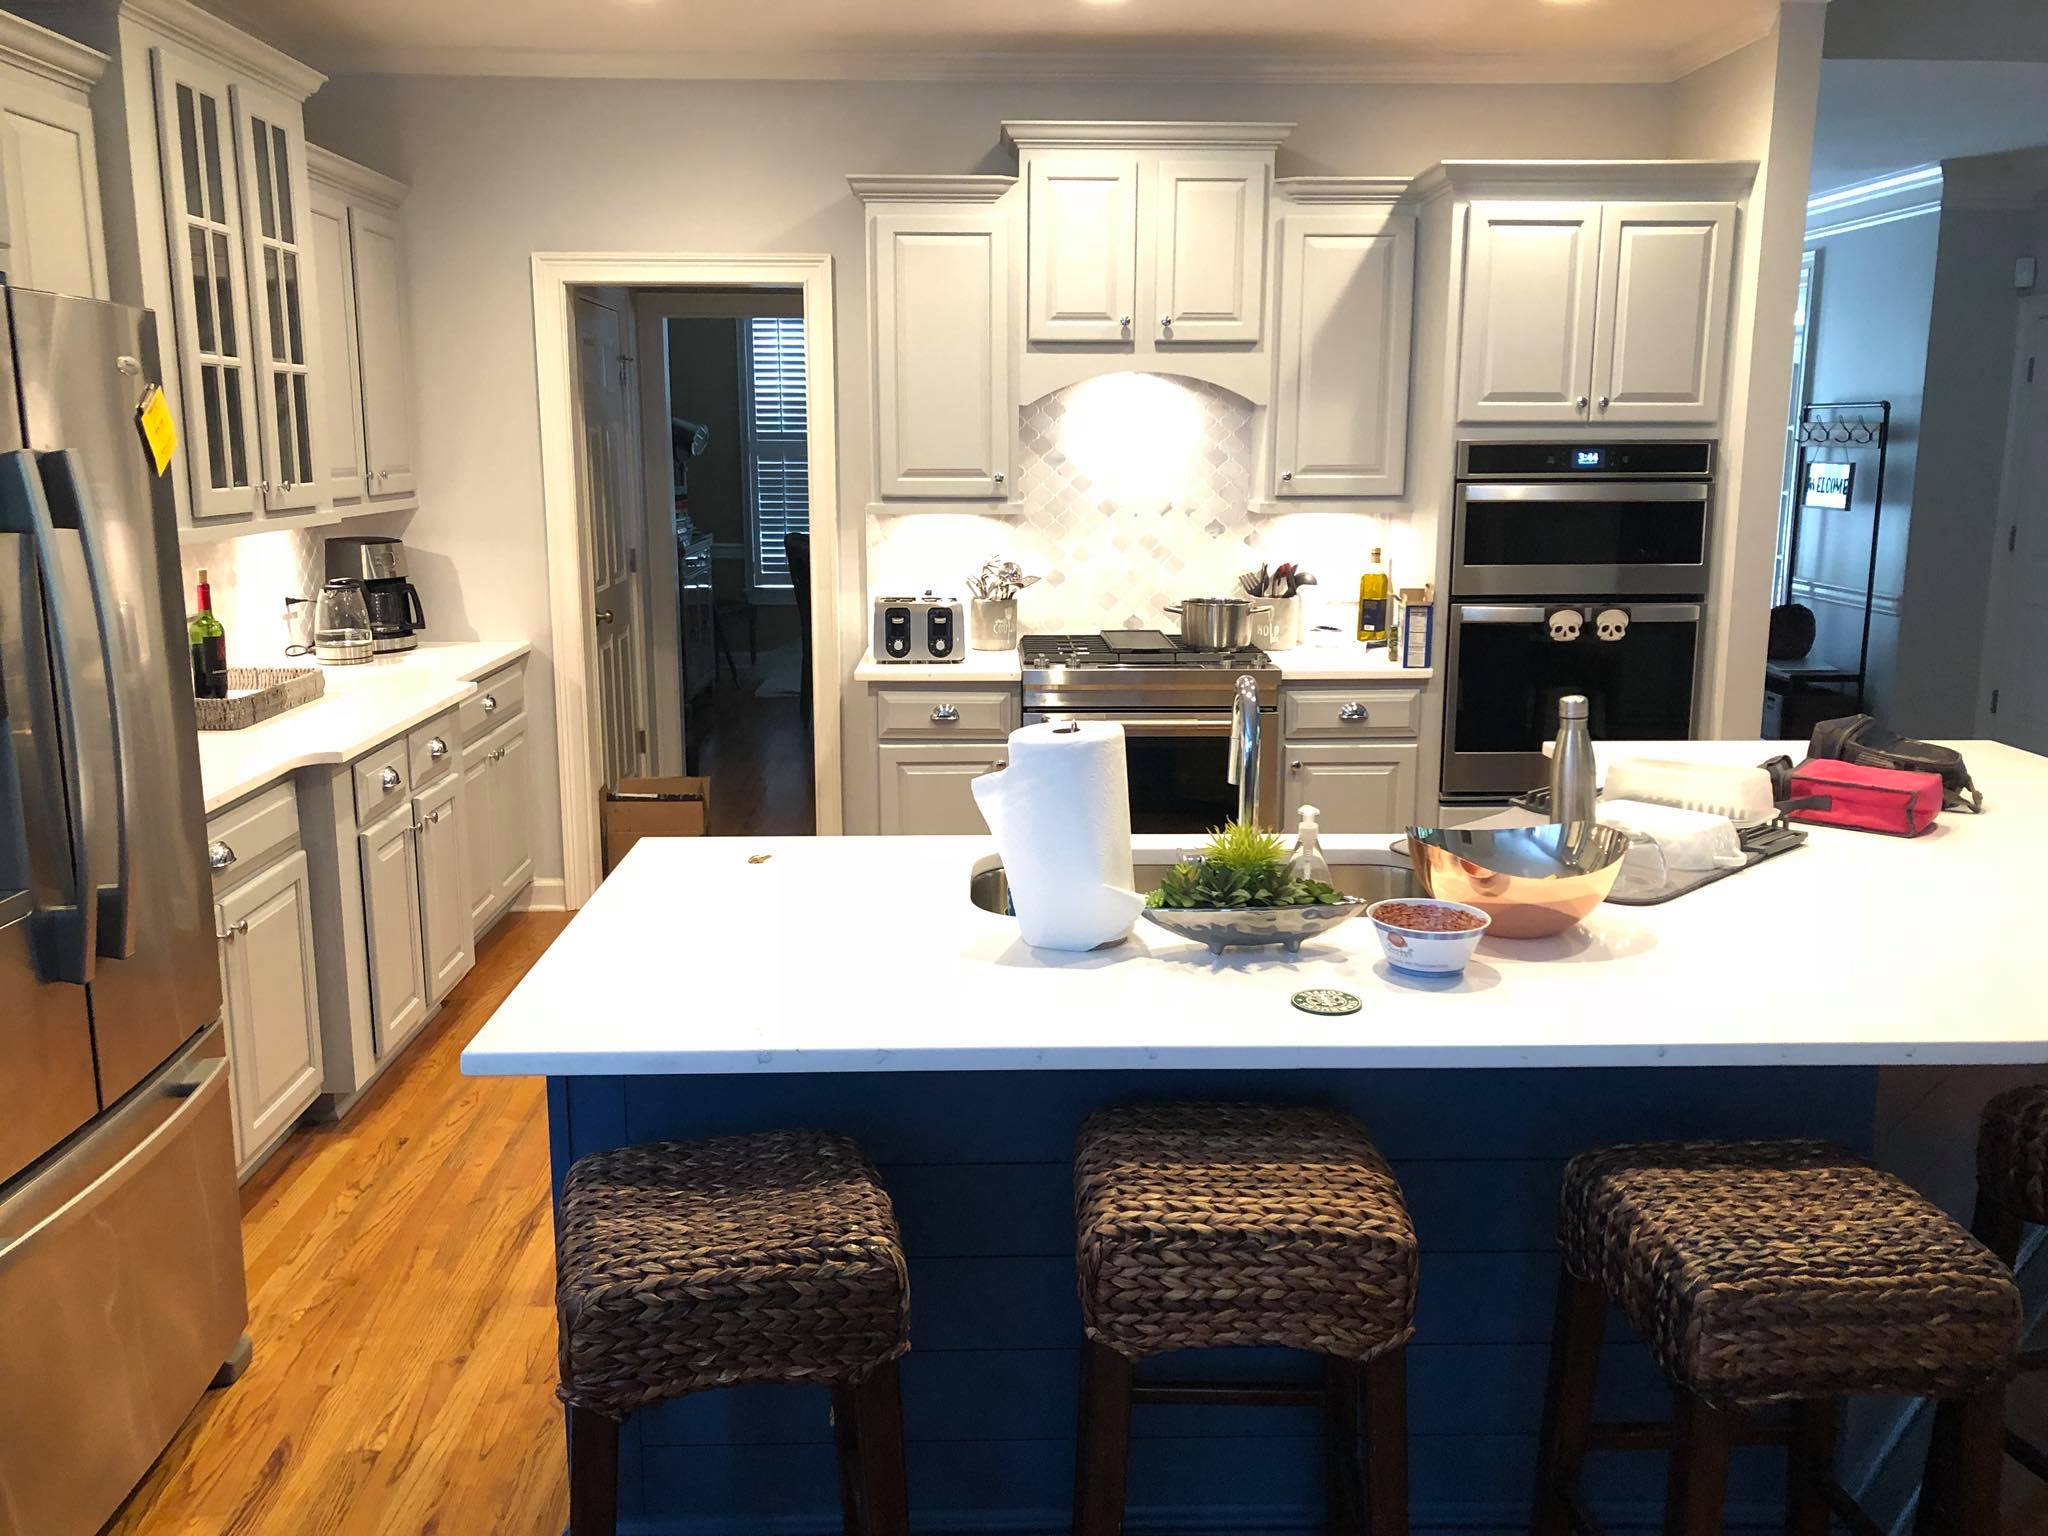 Full Kitchen Remodeling with Upper and Lower Cabinets Painted White